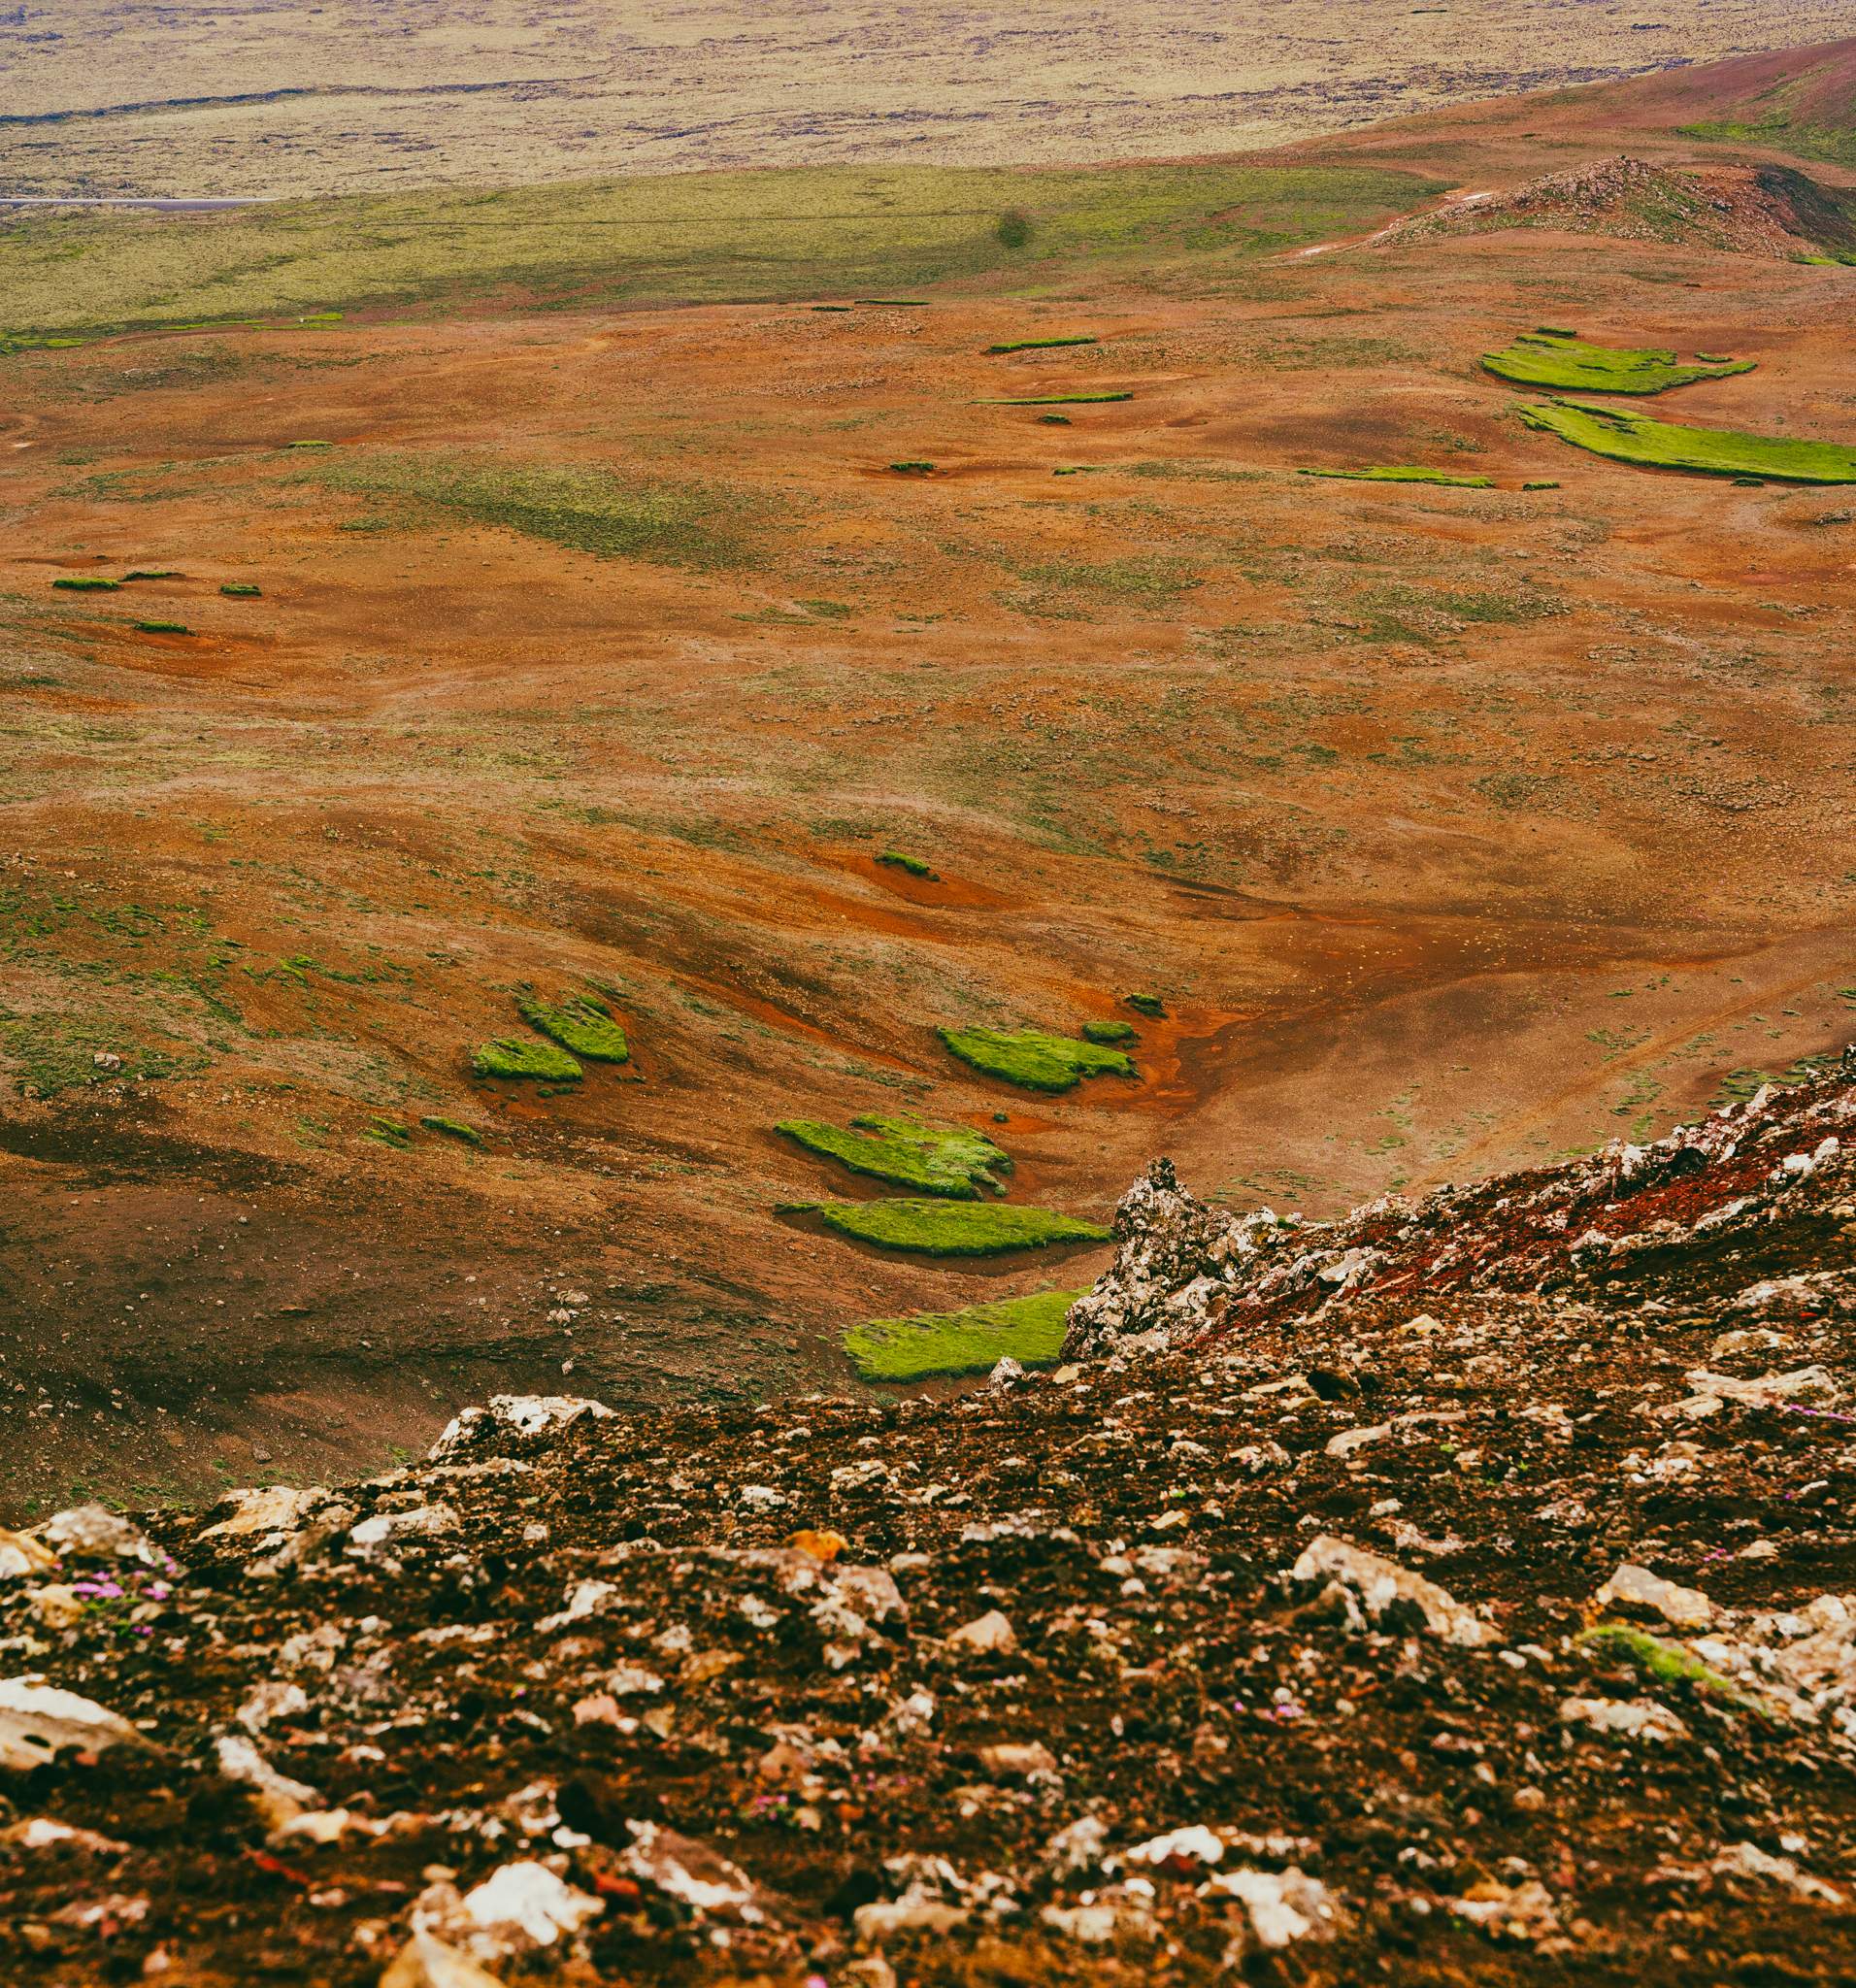 Love how the green patches of grass (or moss) look on the barren land